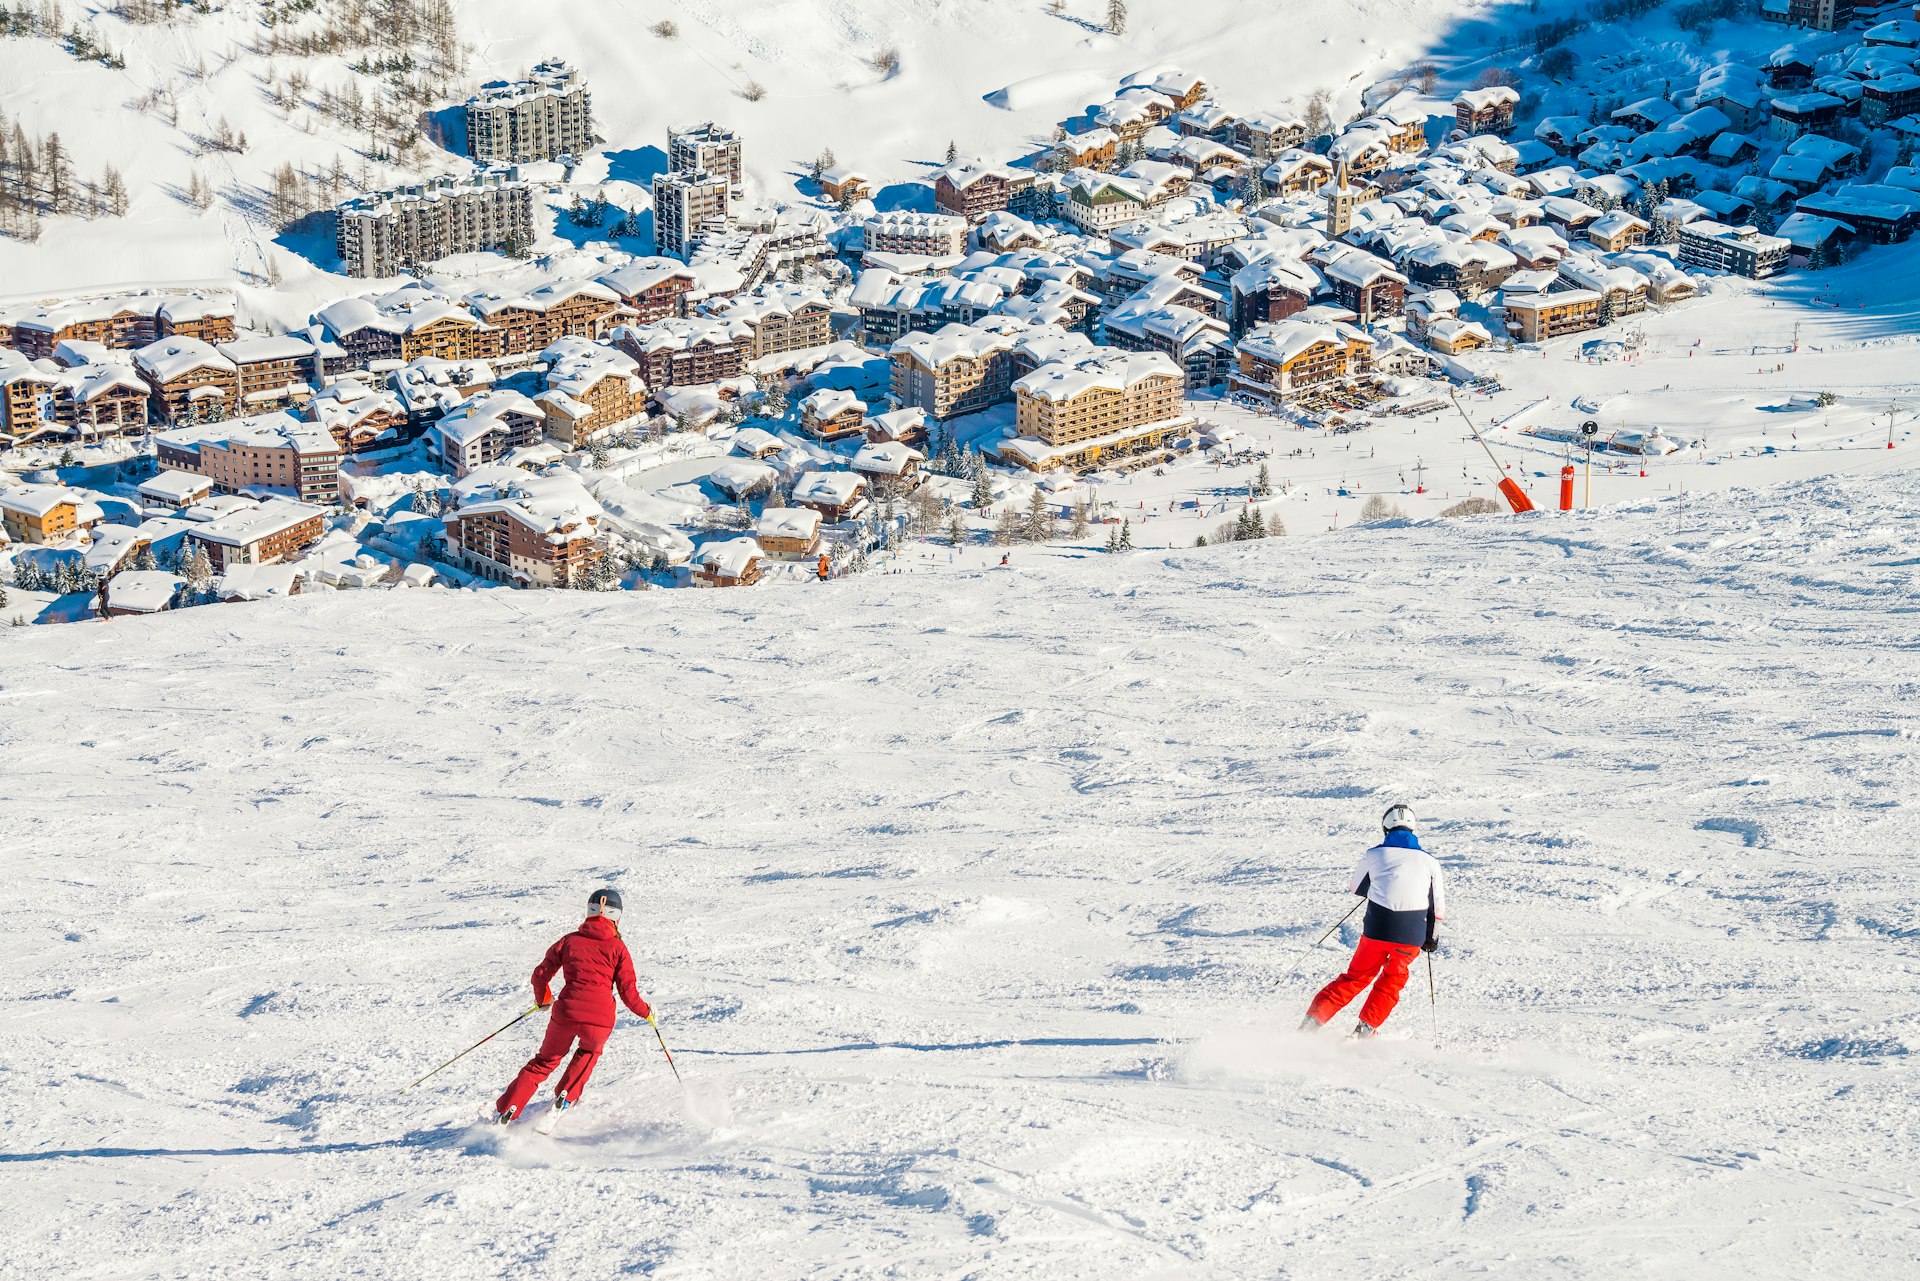 Two skiers viewed from behind as they descend a slope towards a town